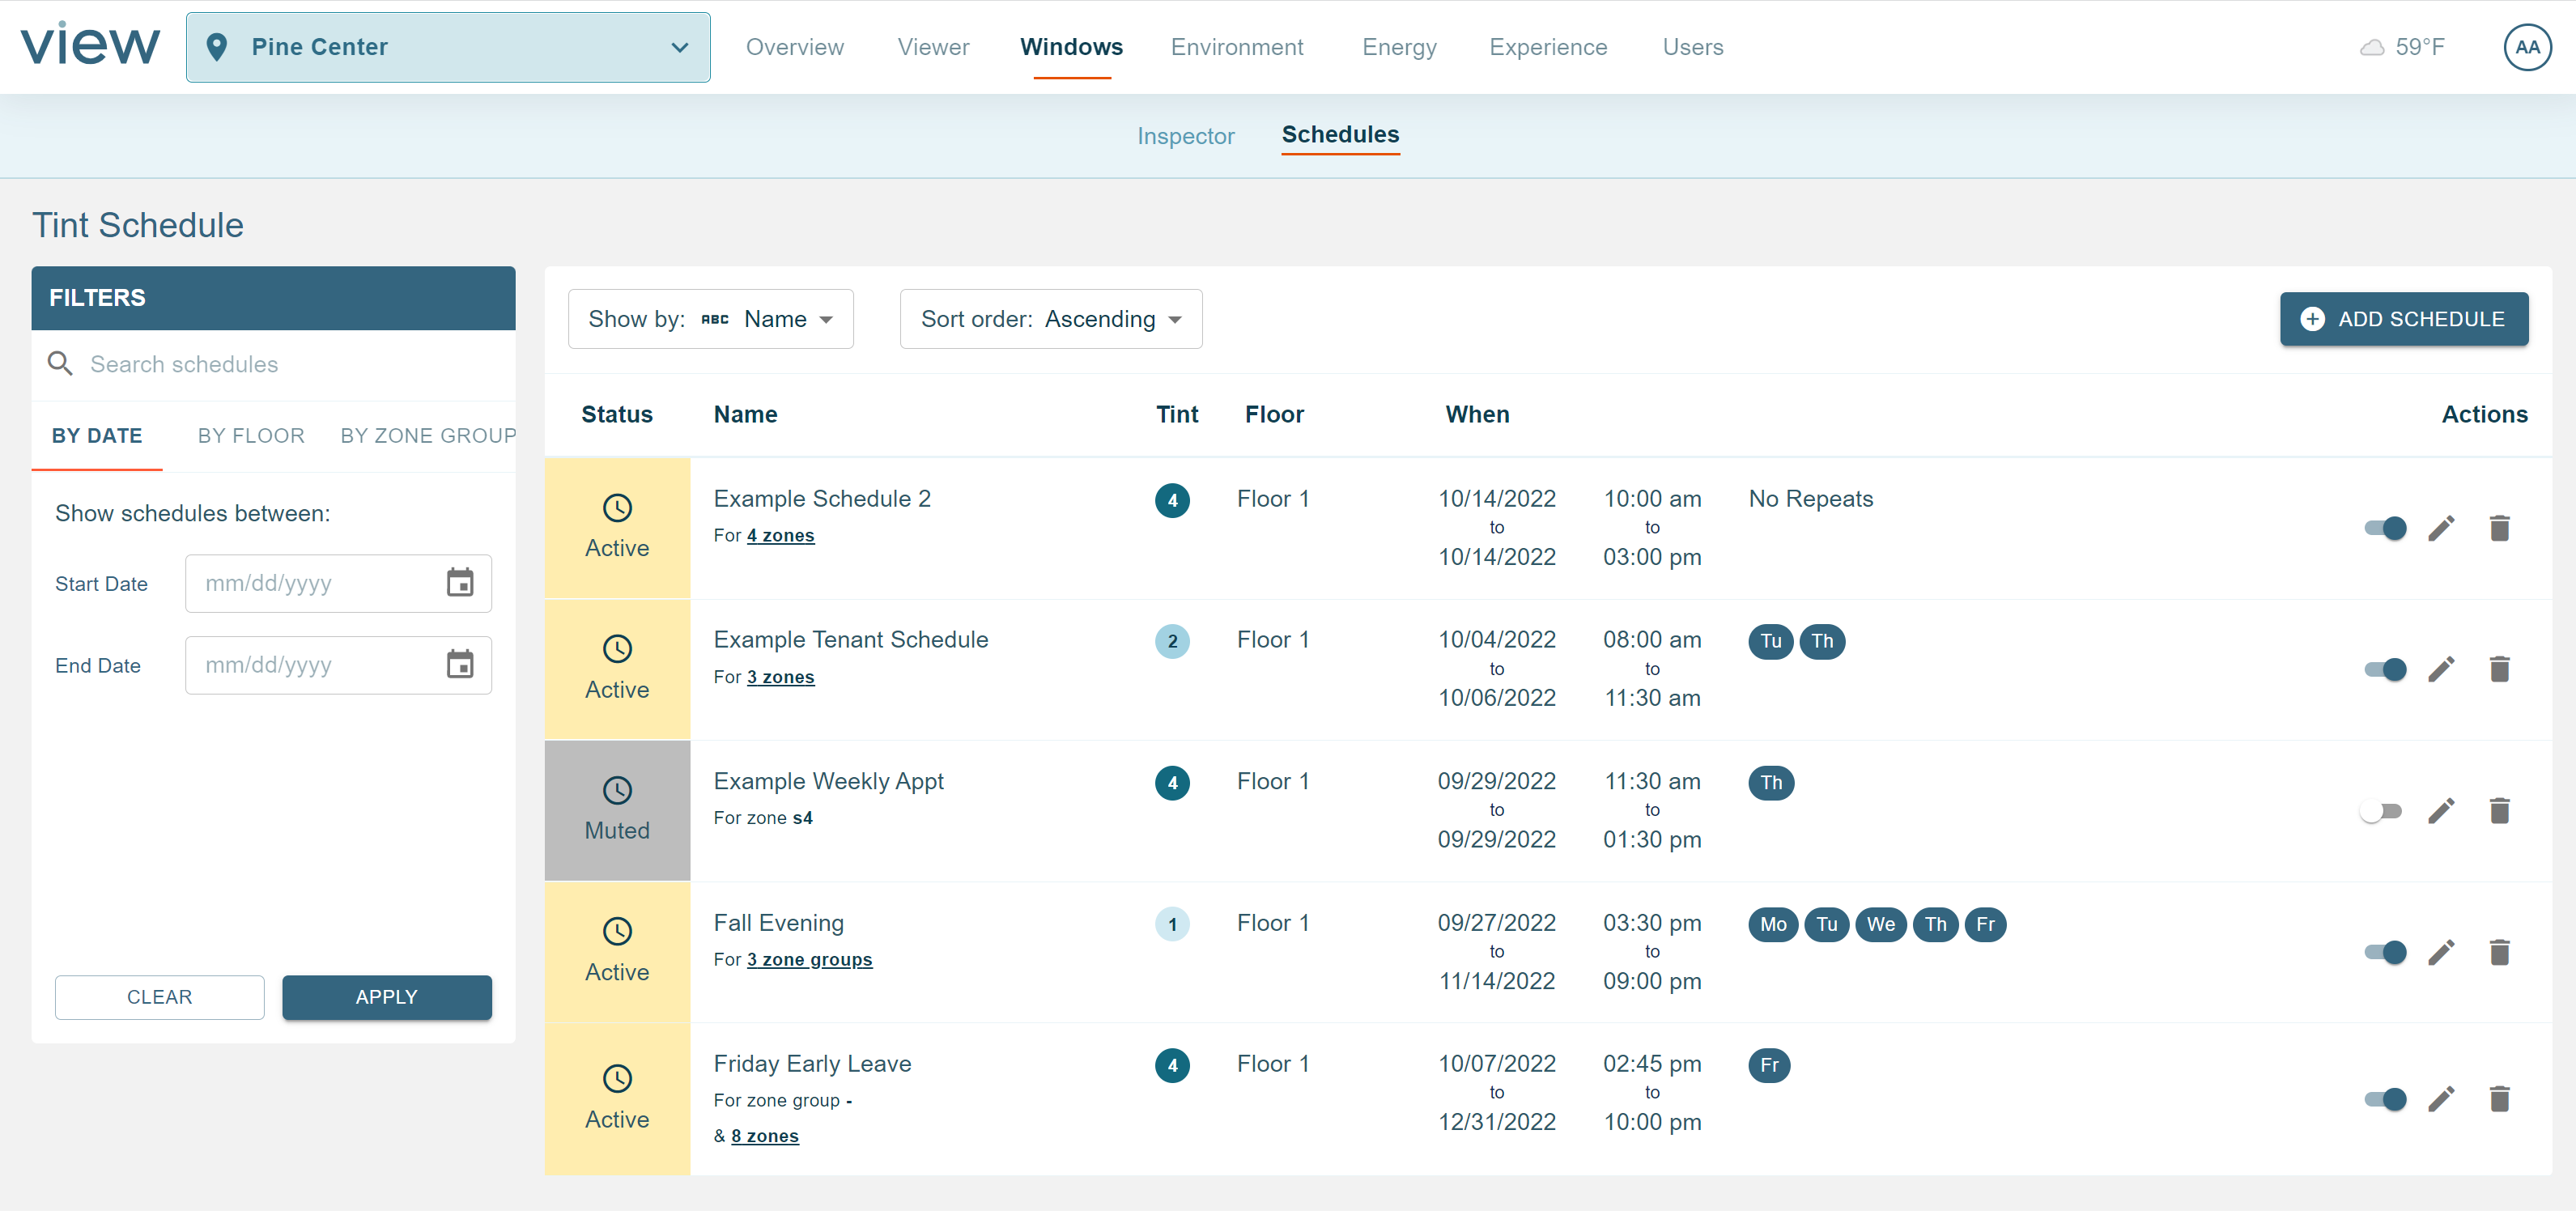 Screenshot of the Tin Schedules page with 5 different example schedules in the list